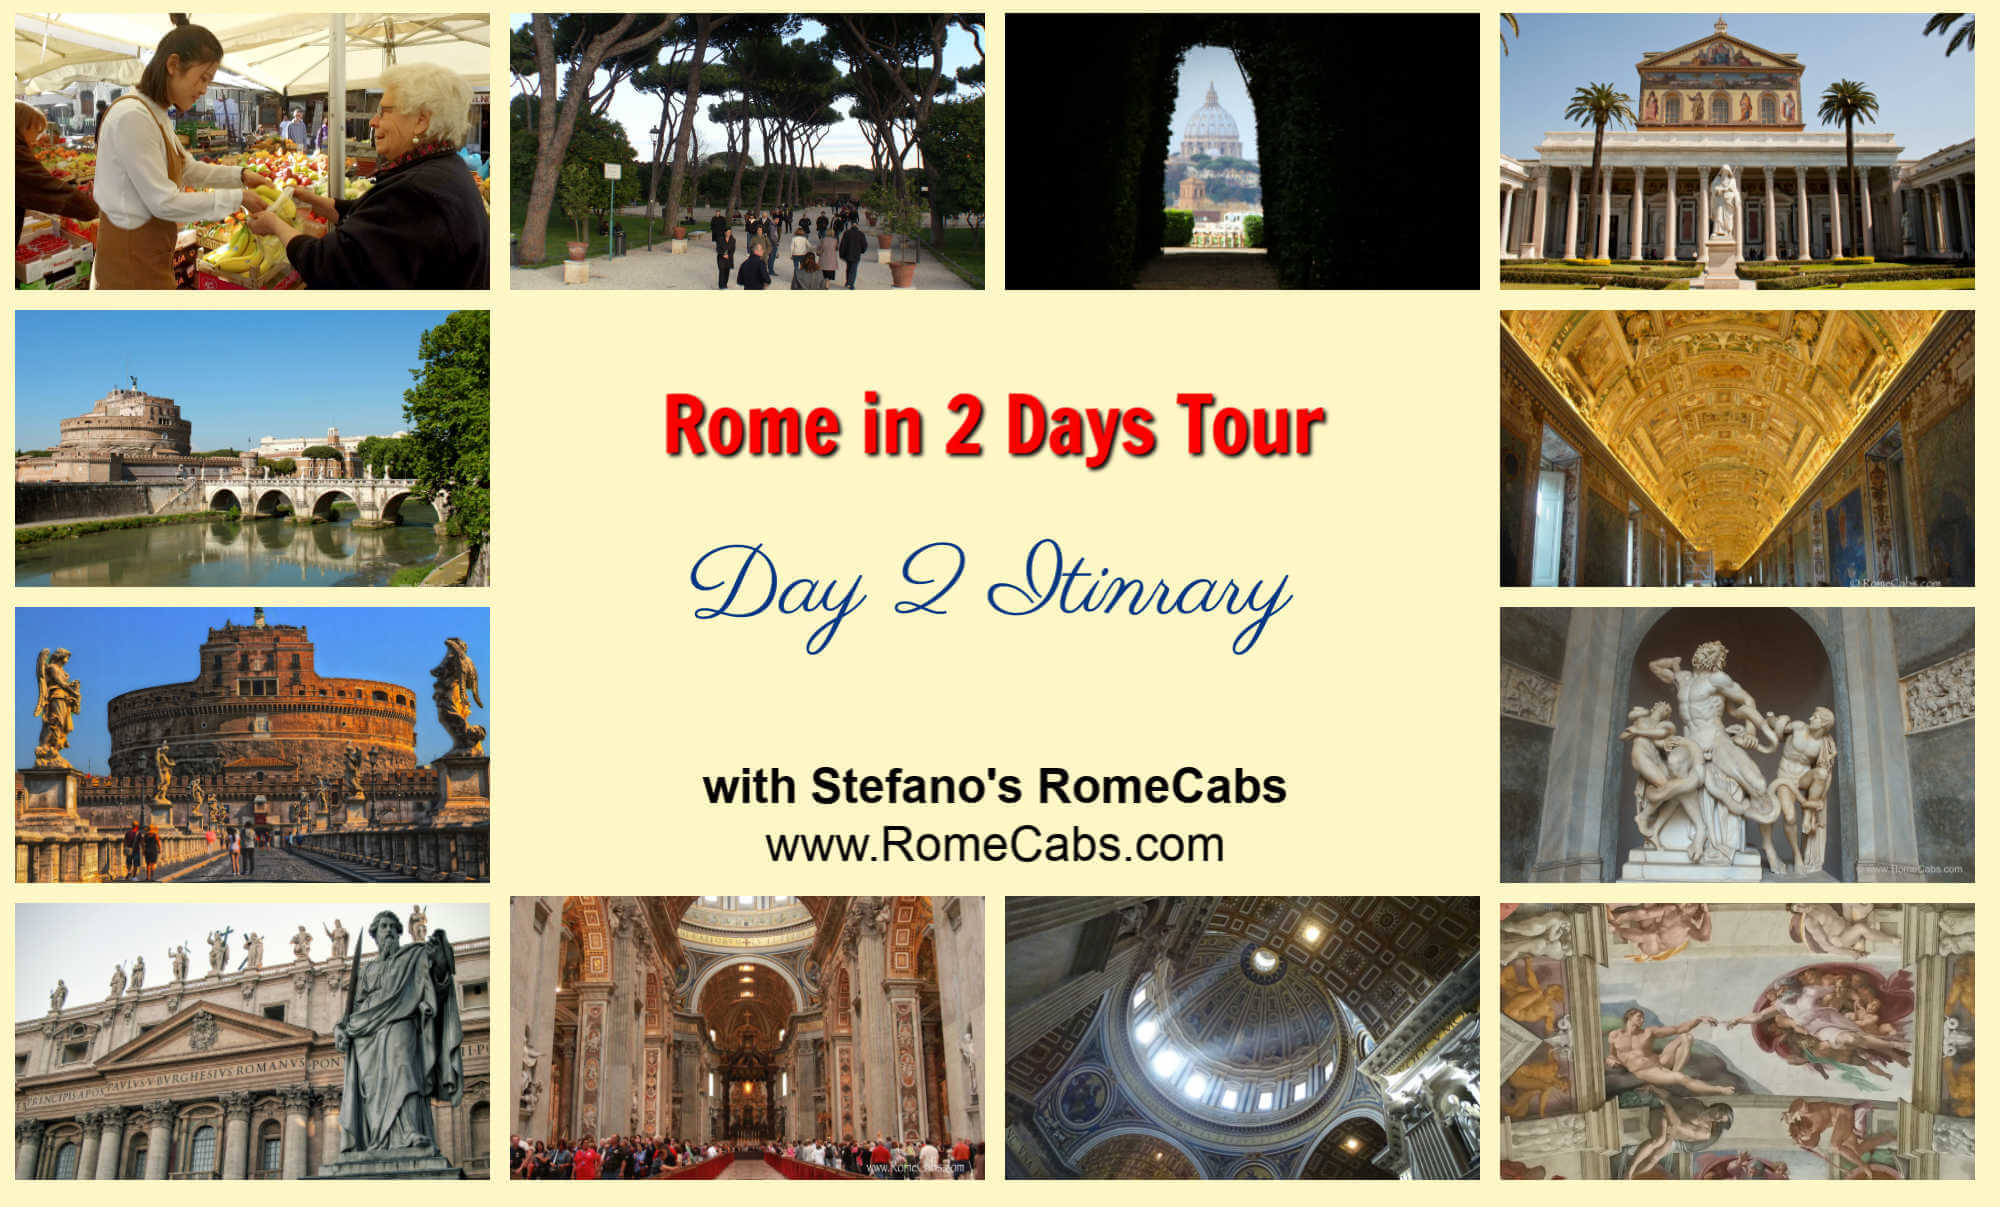 Rome in 2 Days Tour 5 most popular Tours of Rome with RomeCabs